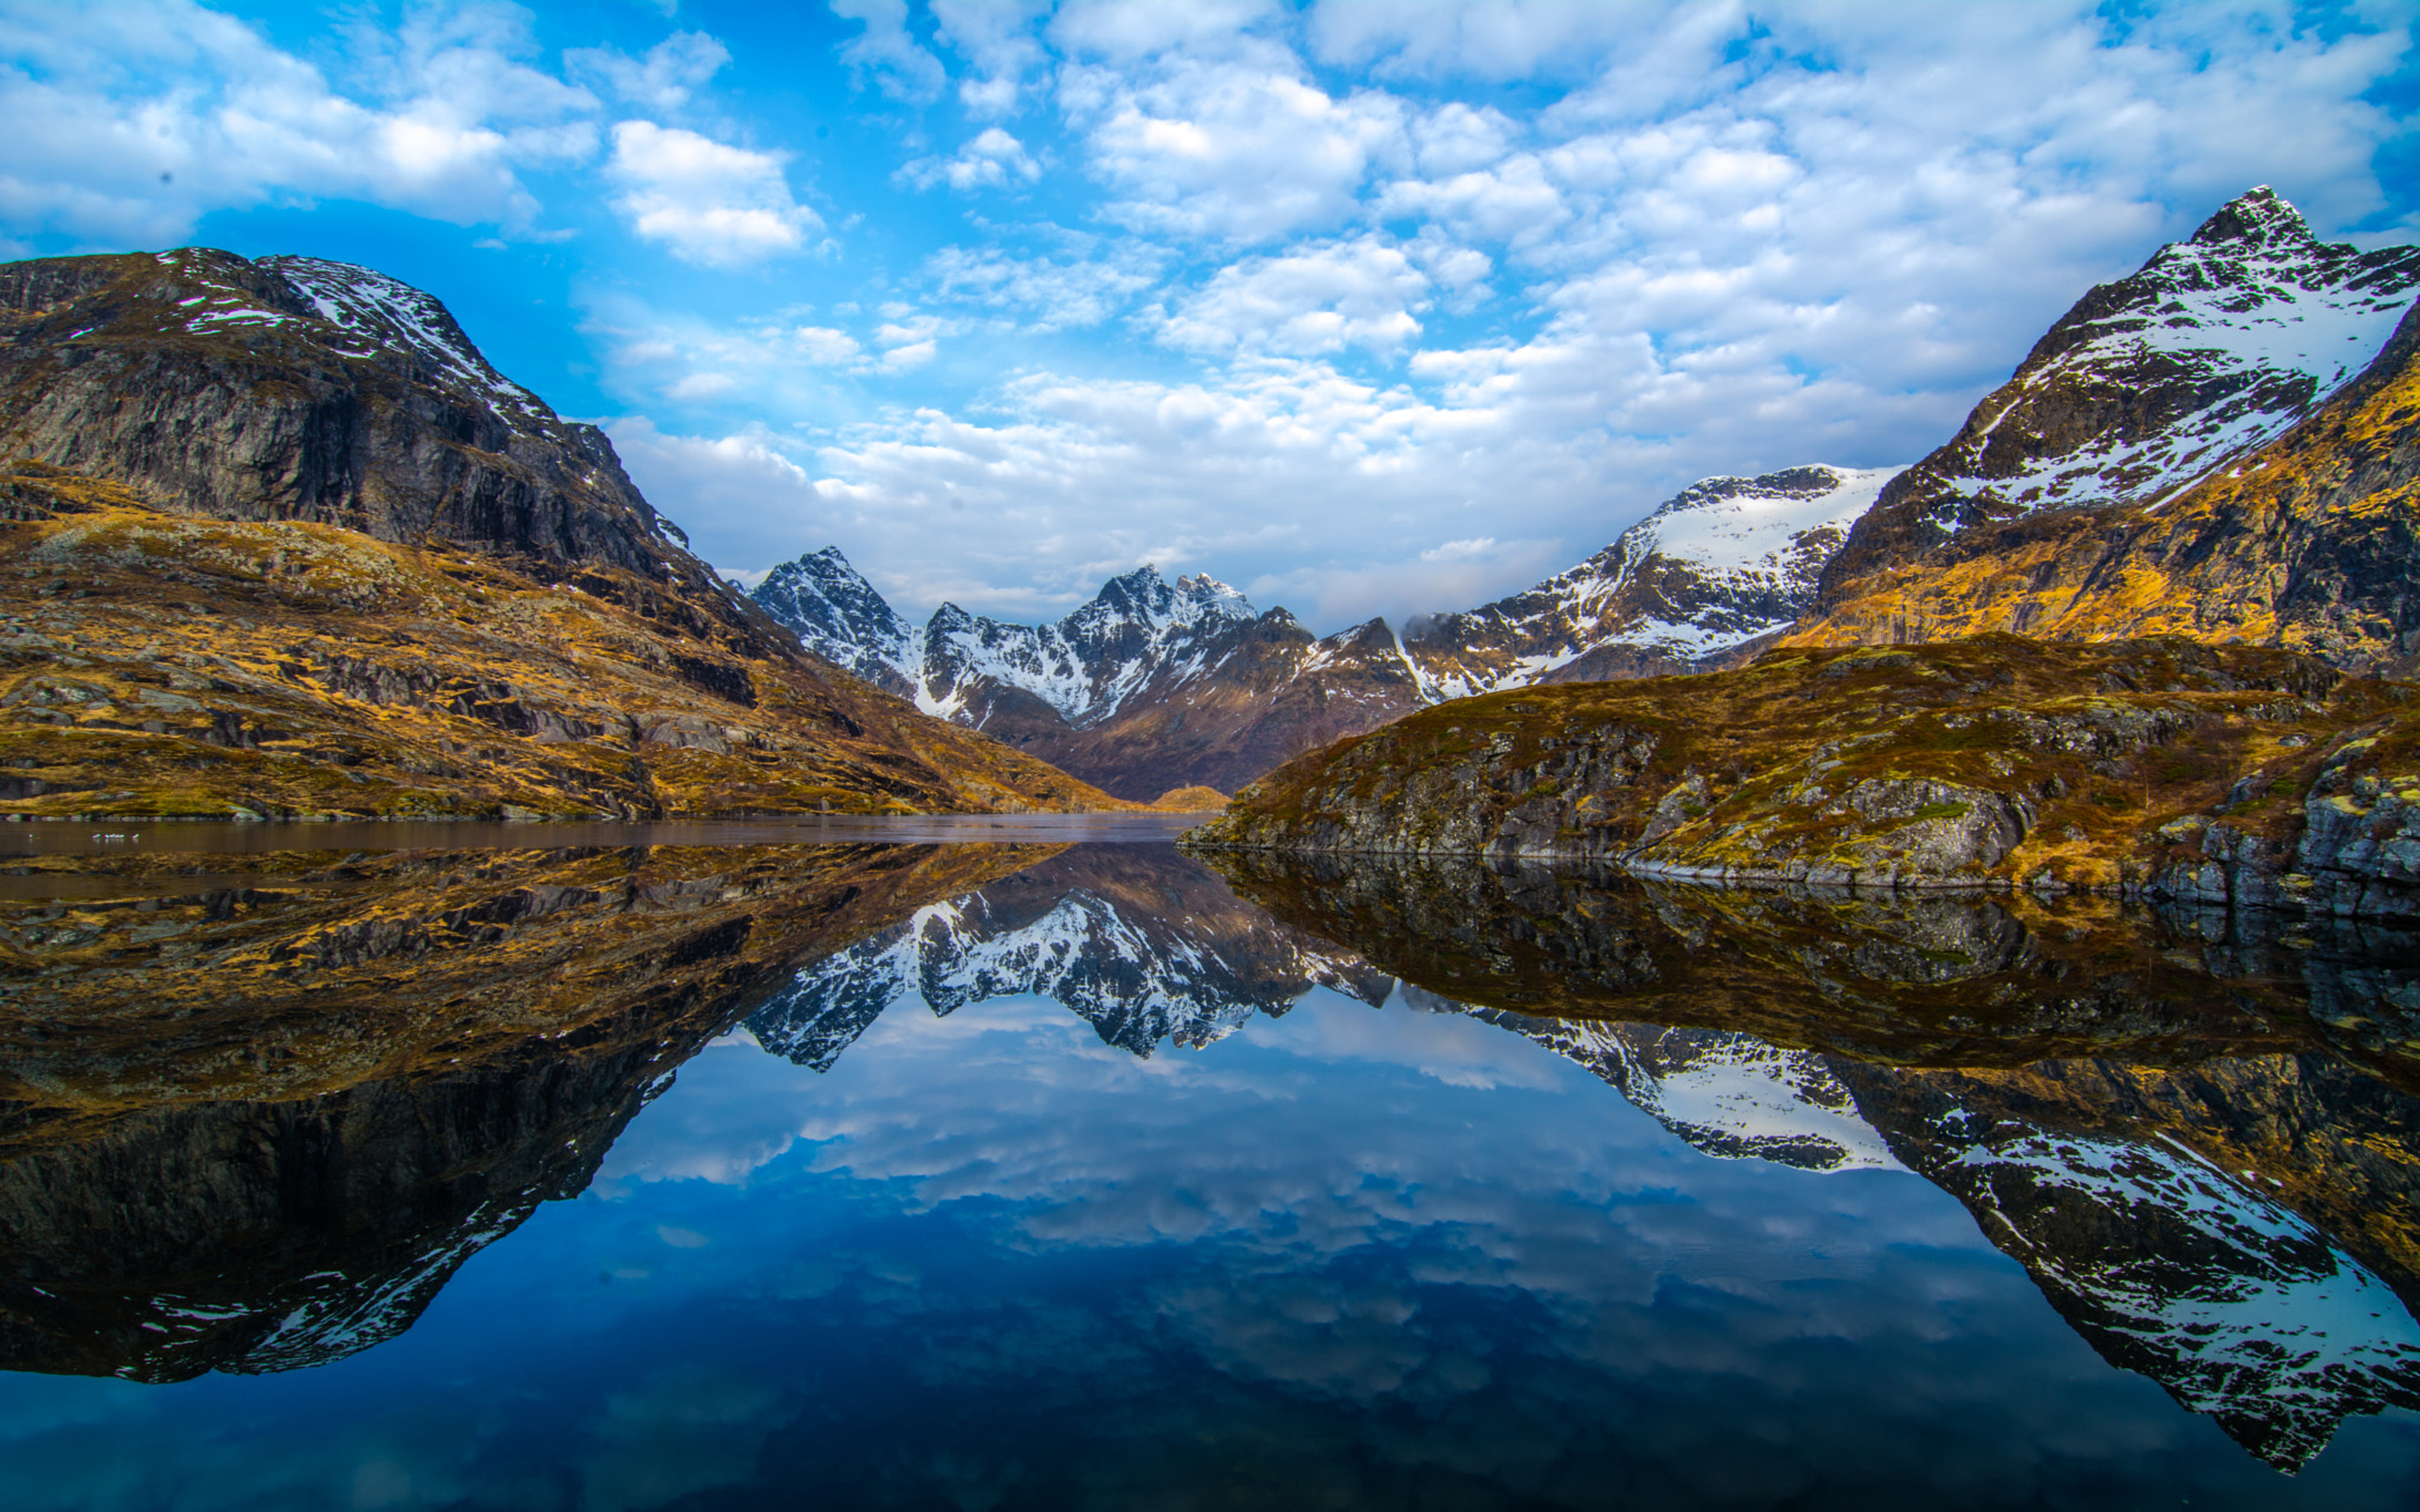 Landscape Nature Mountains Reflection In Water Lofoten Norway Country In  Europe Hd Wallpapers For Mobile Phones Tablet And Laptop 3840x2400 :  